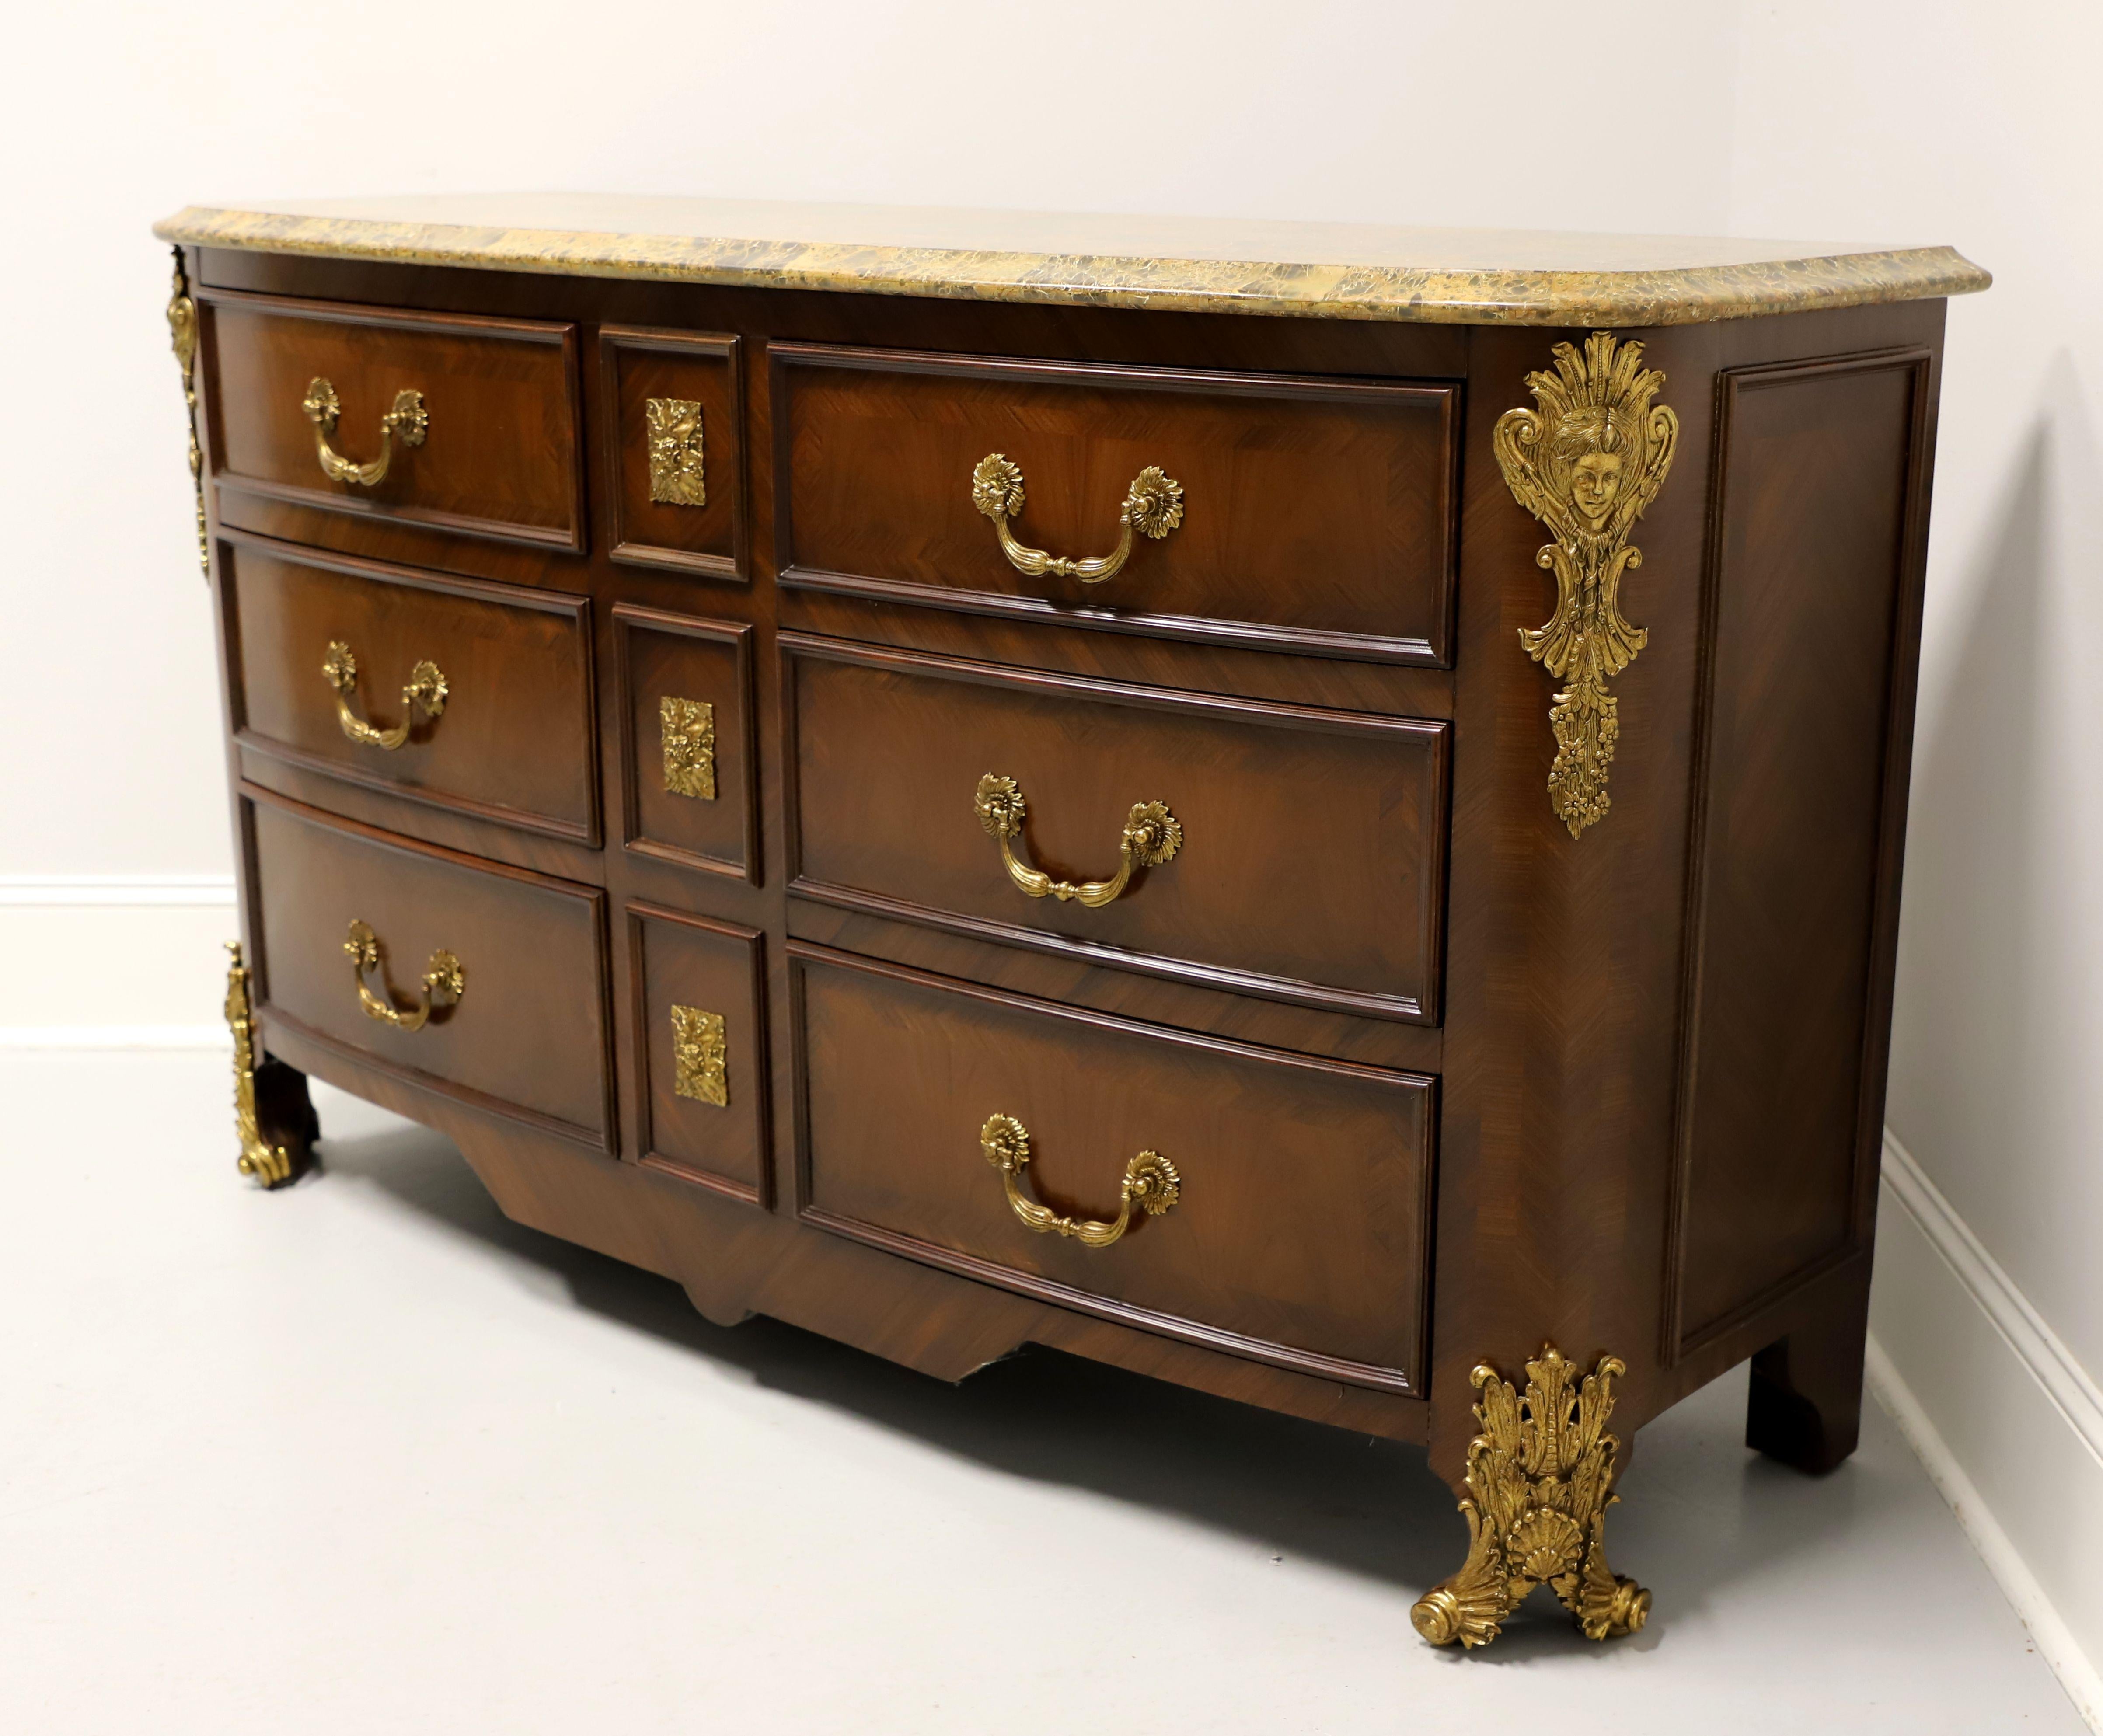 MAITLAND SMITH Inlaid Walnut French Regency Occasional Chest with Ormolu Mounts In Good Condition For Sale In Charlotte, NC